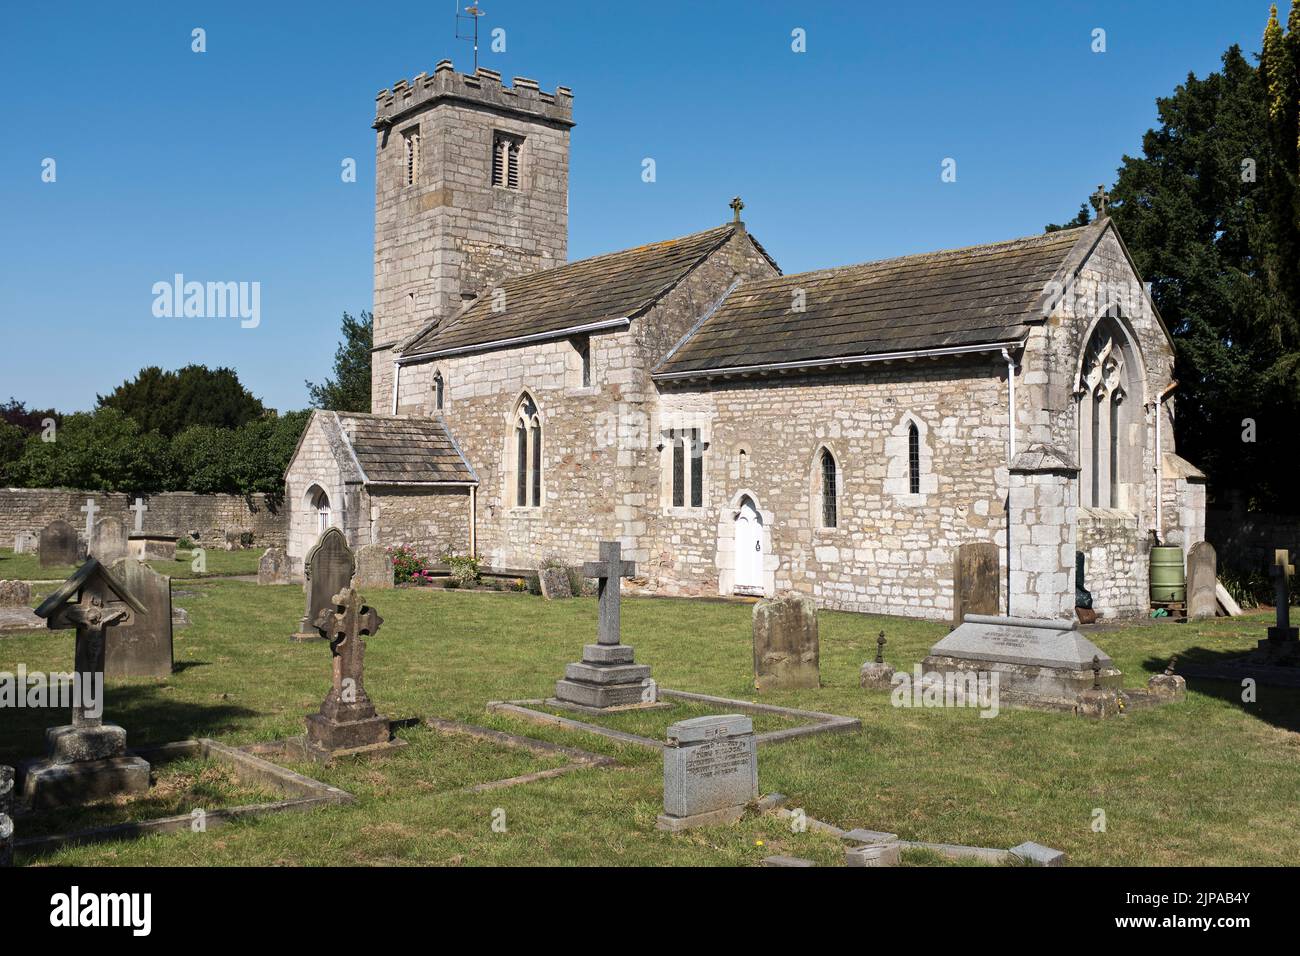 dh St Andrews Church NEWTON KYME YORKSHIRE English country churches exterior building in churchyard graveyard britain Stock Photo